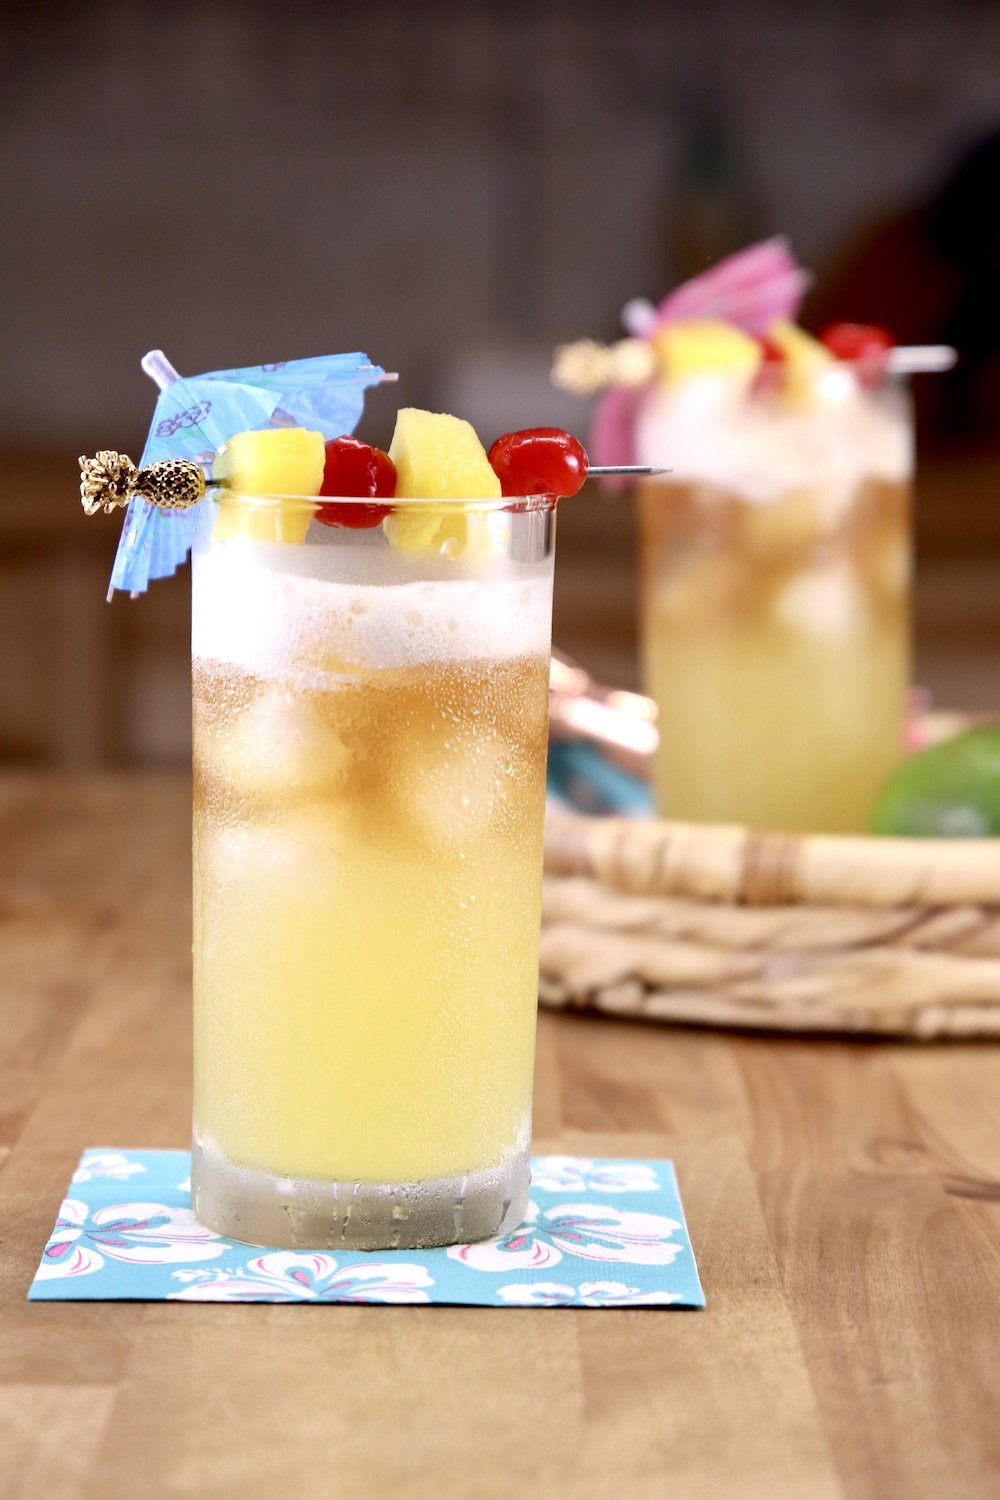 Mai Tai Cocktails with drink umbrellas, cherries and pineapple garnish